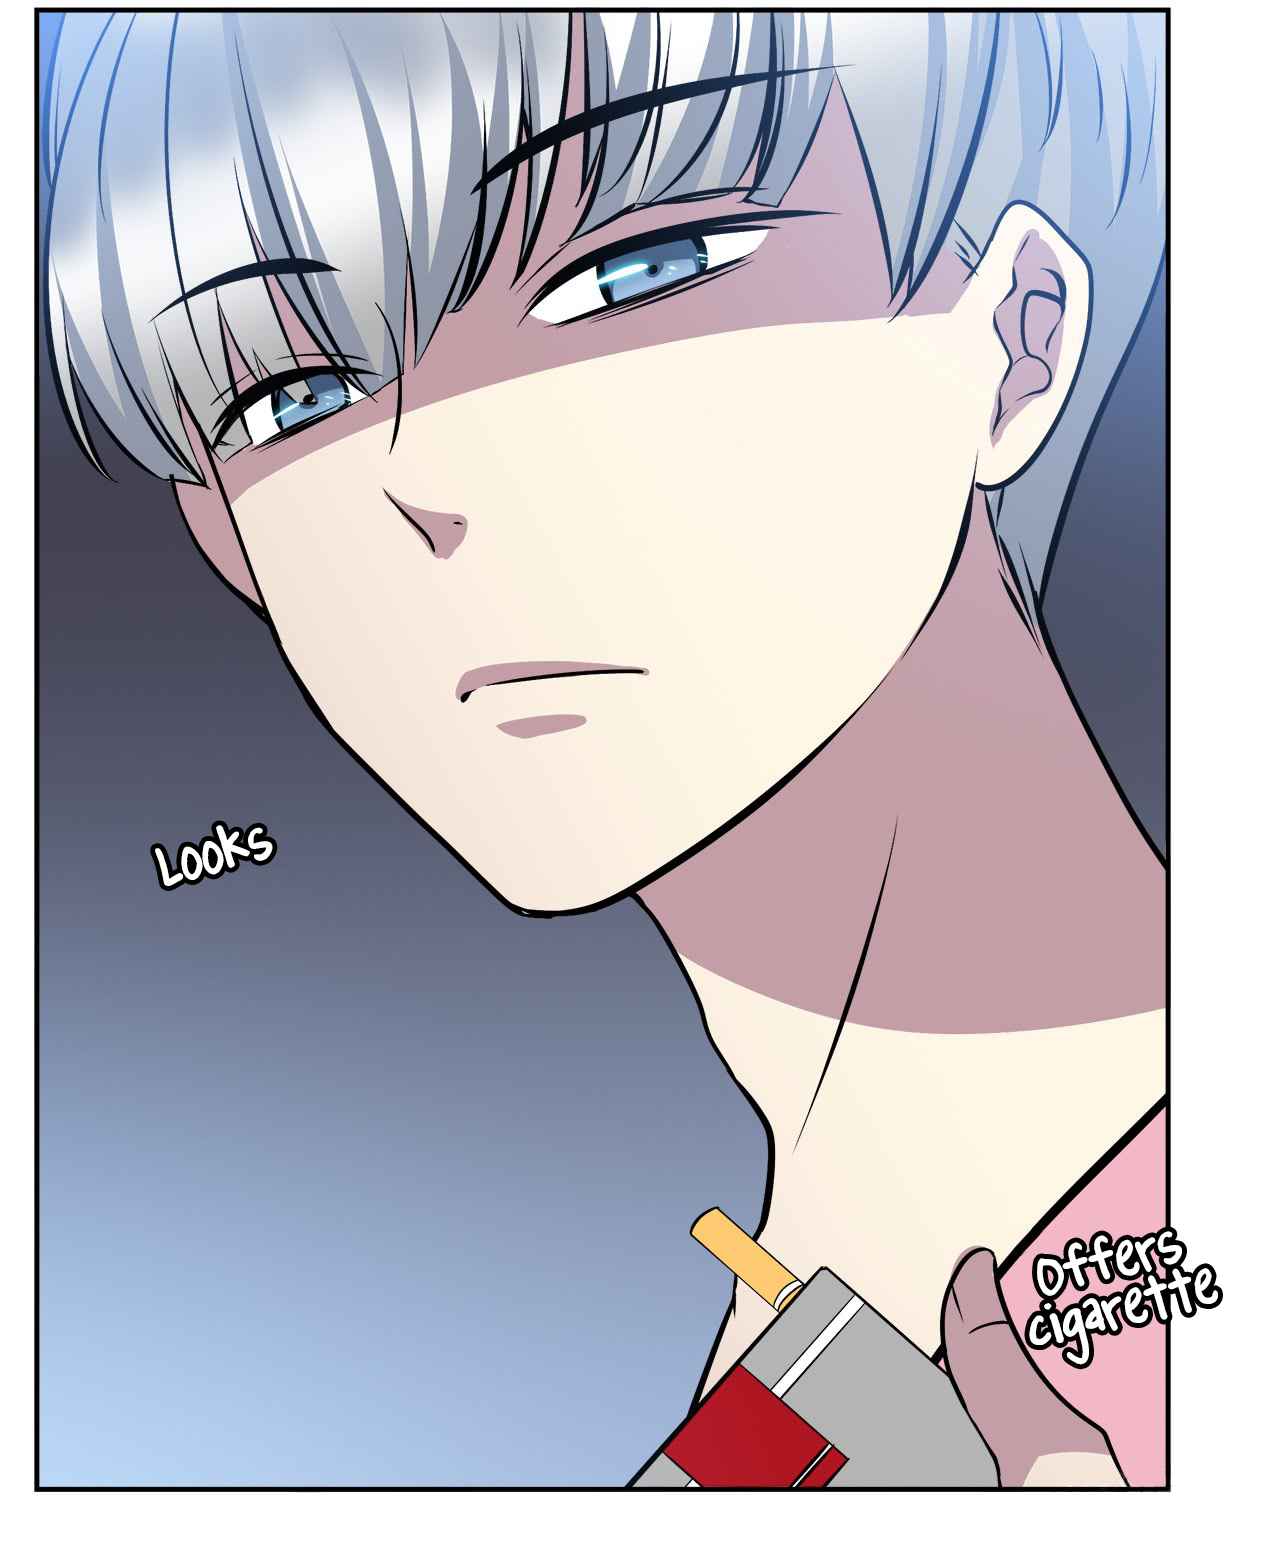 Time Lover Ch. 61